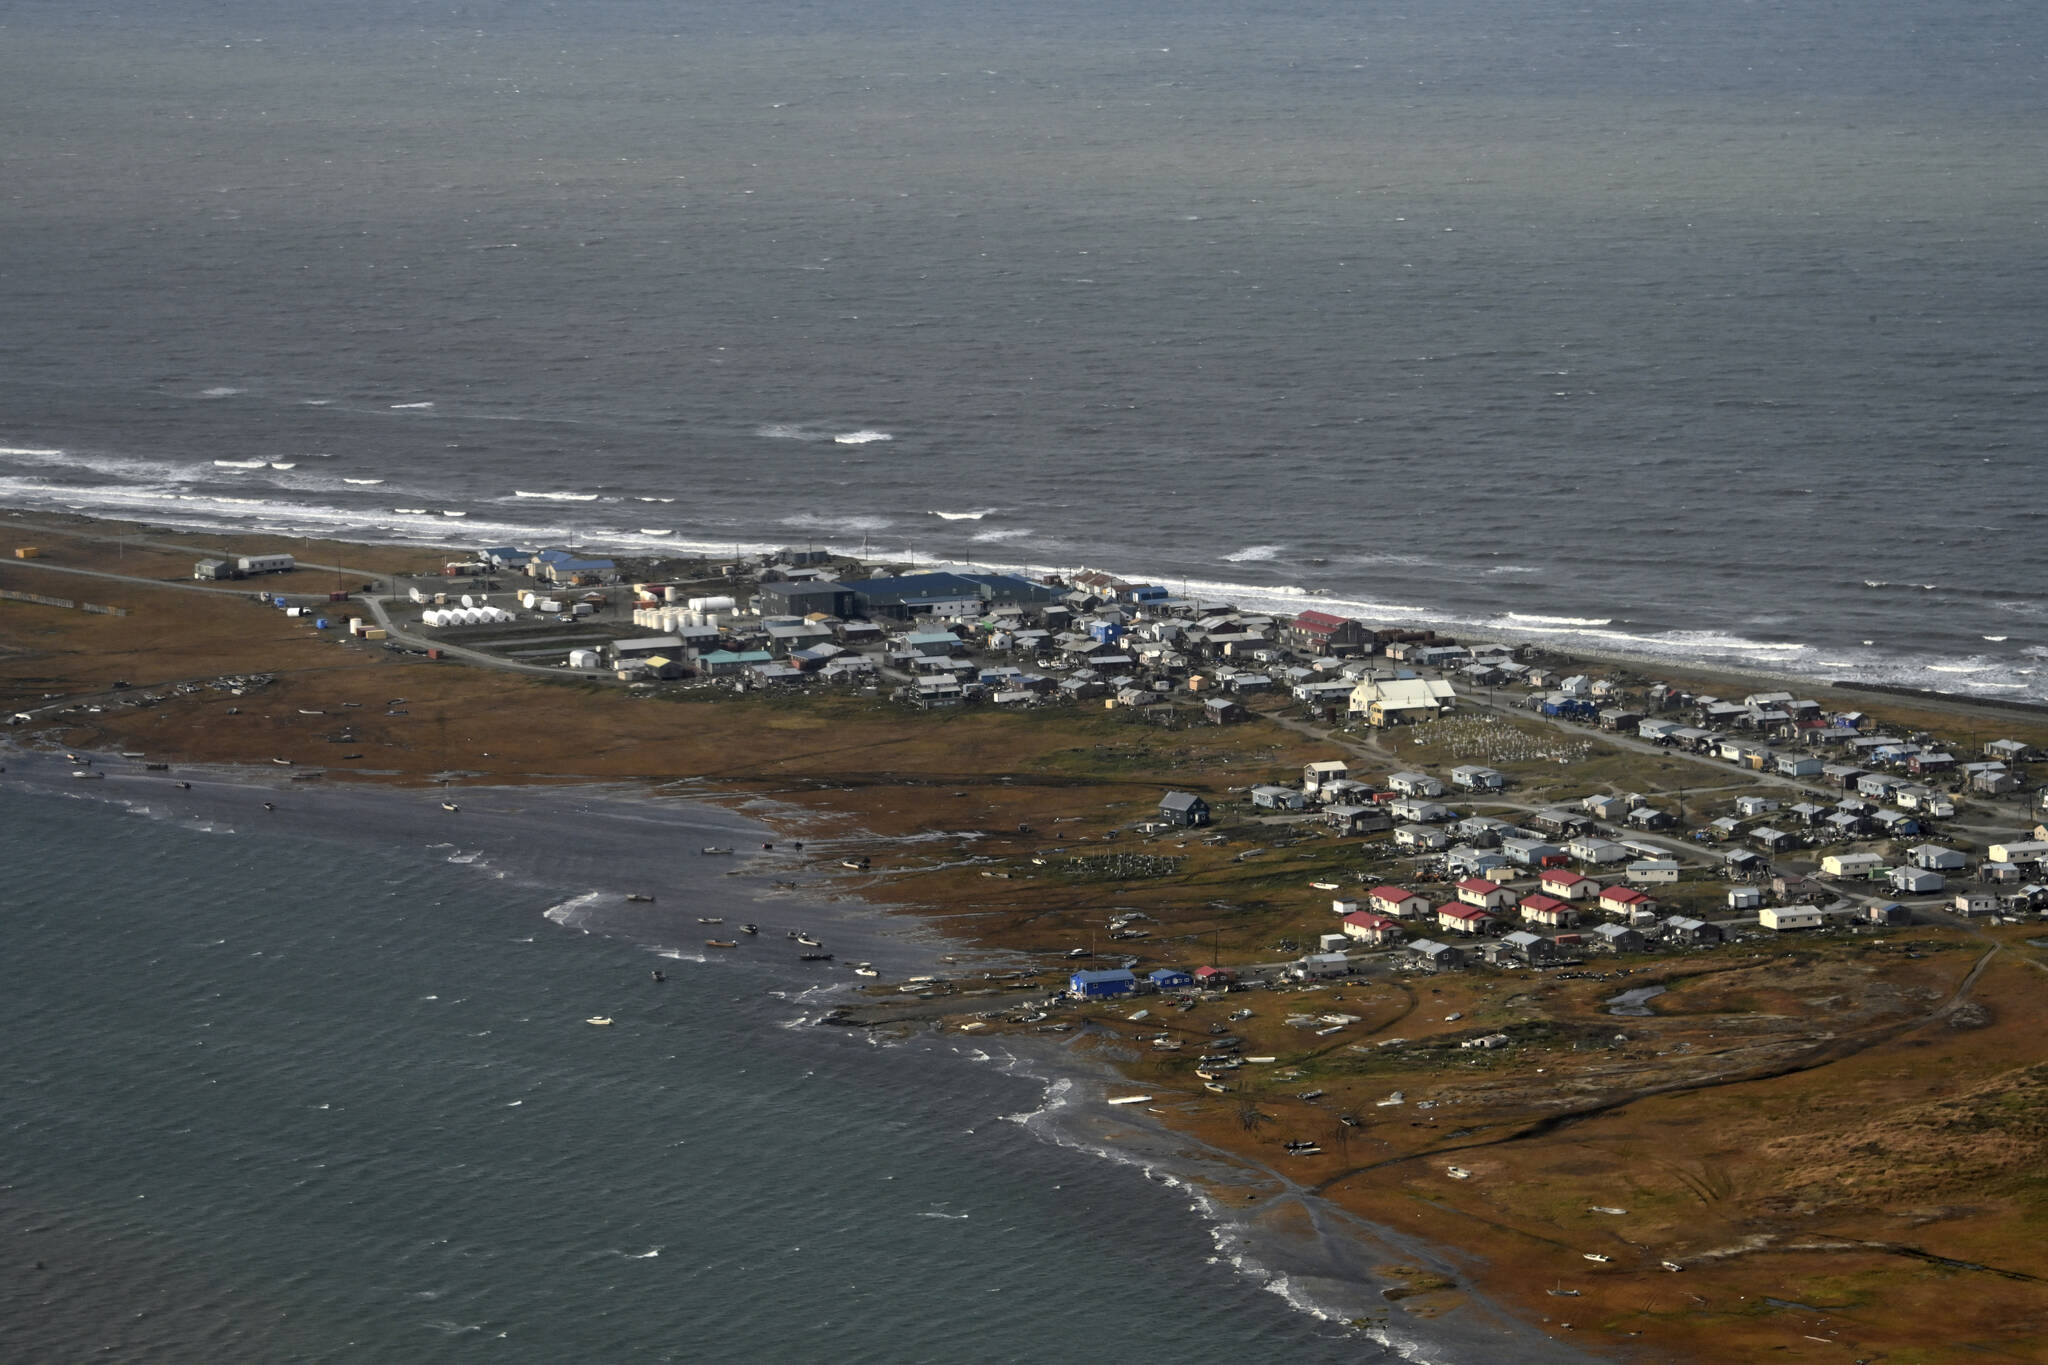 In this image provided by the U.S. Coast Guard, an aerial view taken during a search and rescue and damage assessment in Deering, Alaska, shows the damage caused by Typhoon Merbok, on Sept. 18, 2022. Authorities are making contact with some of the most remote villages in the United States to determine the need for food and water and assess damage from a massive weekend storm that flooded communities dotting Alaska’s vast western coast. (Petty Officer 3rd Class Ian Gray/U.S. Coast Guard via AP)